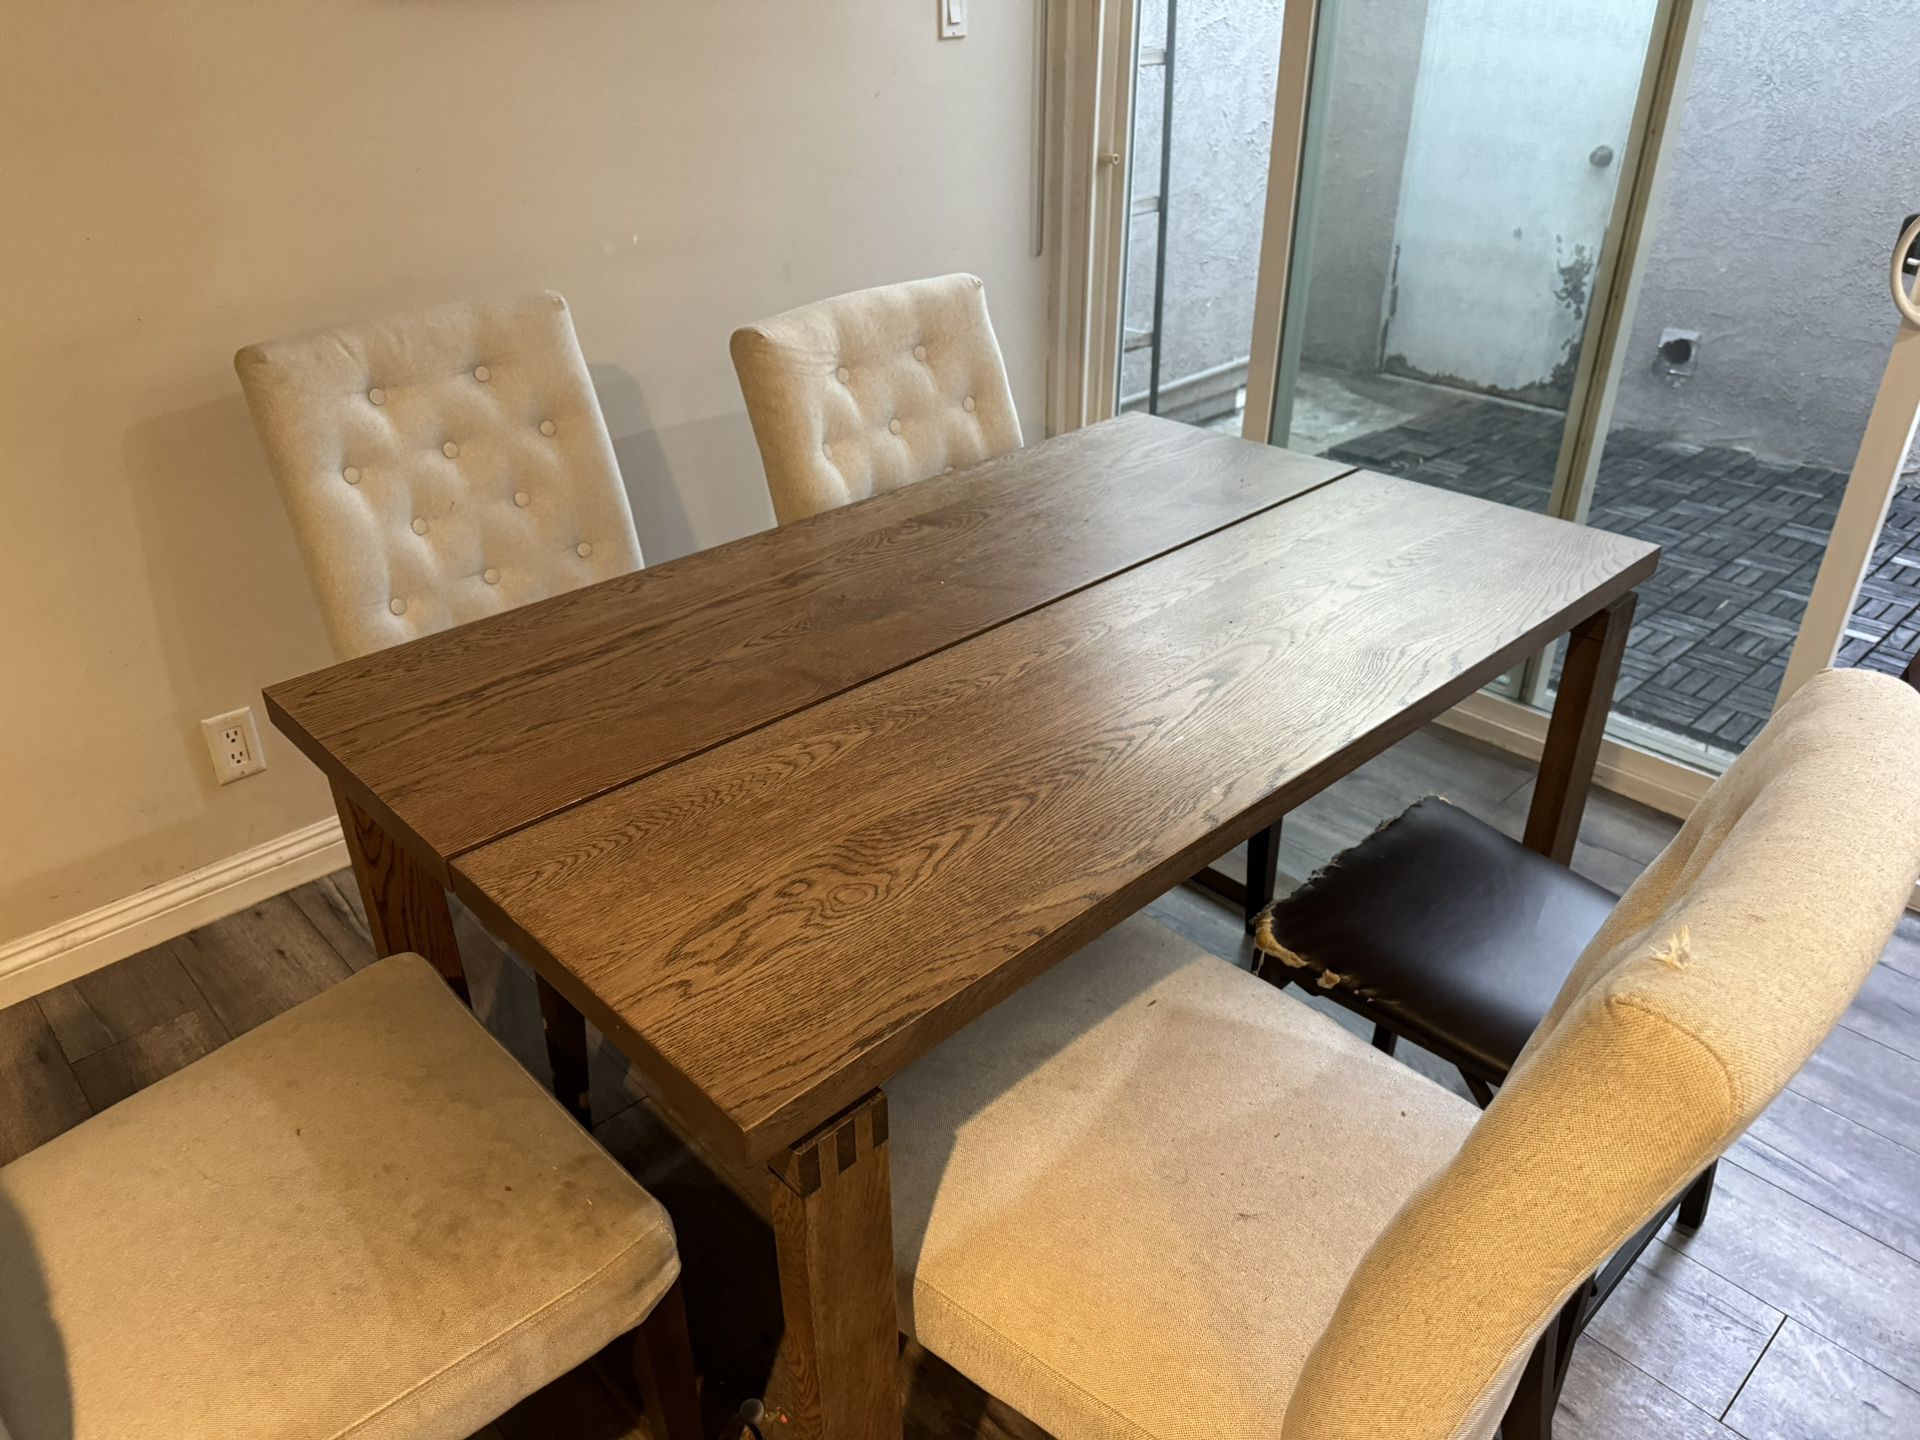 Dining table with chair